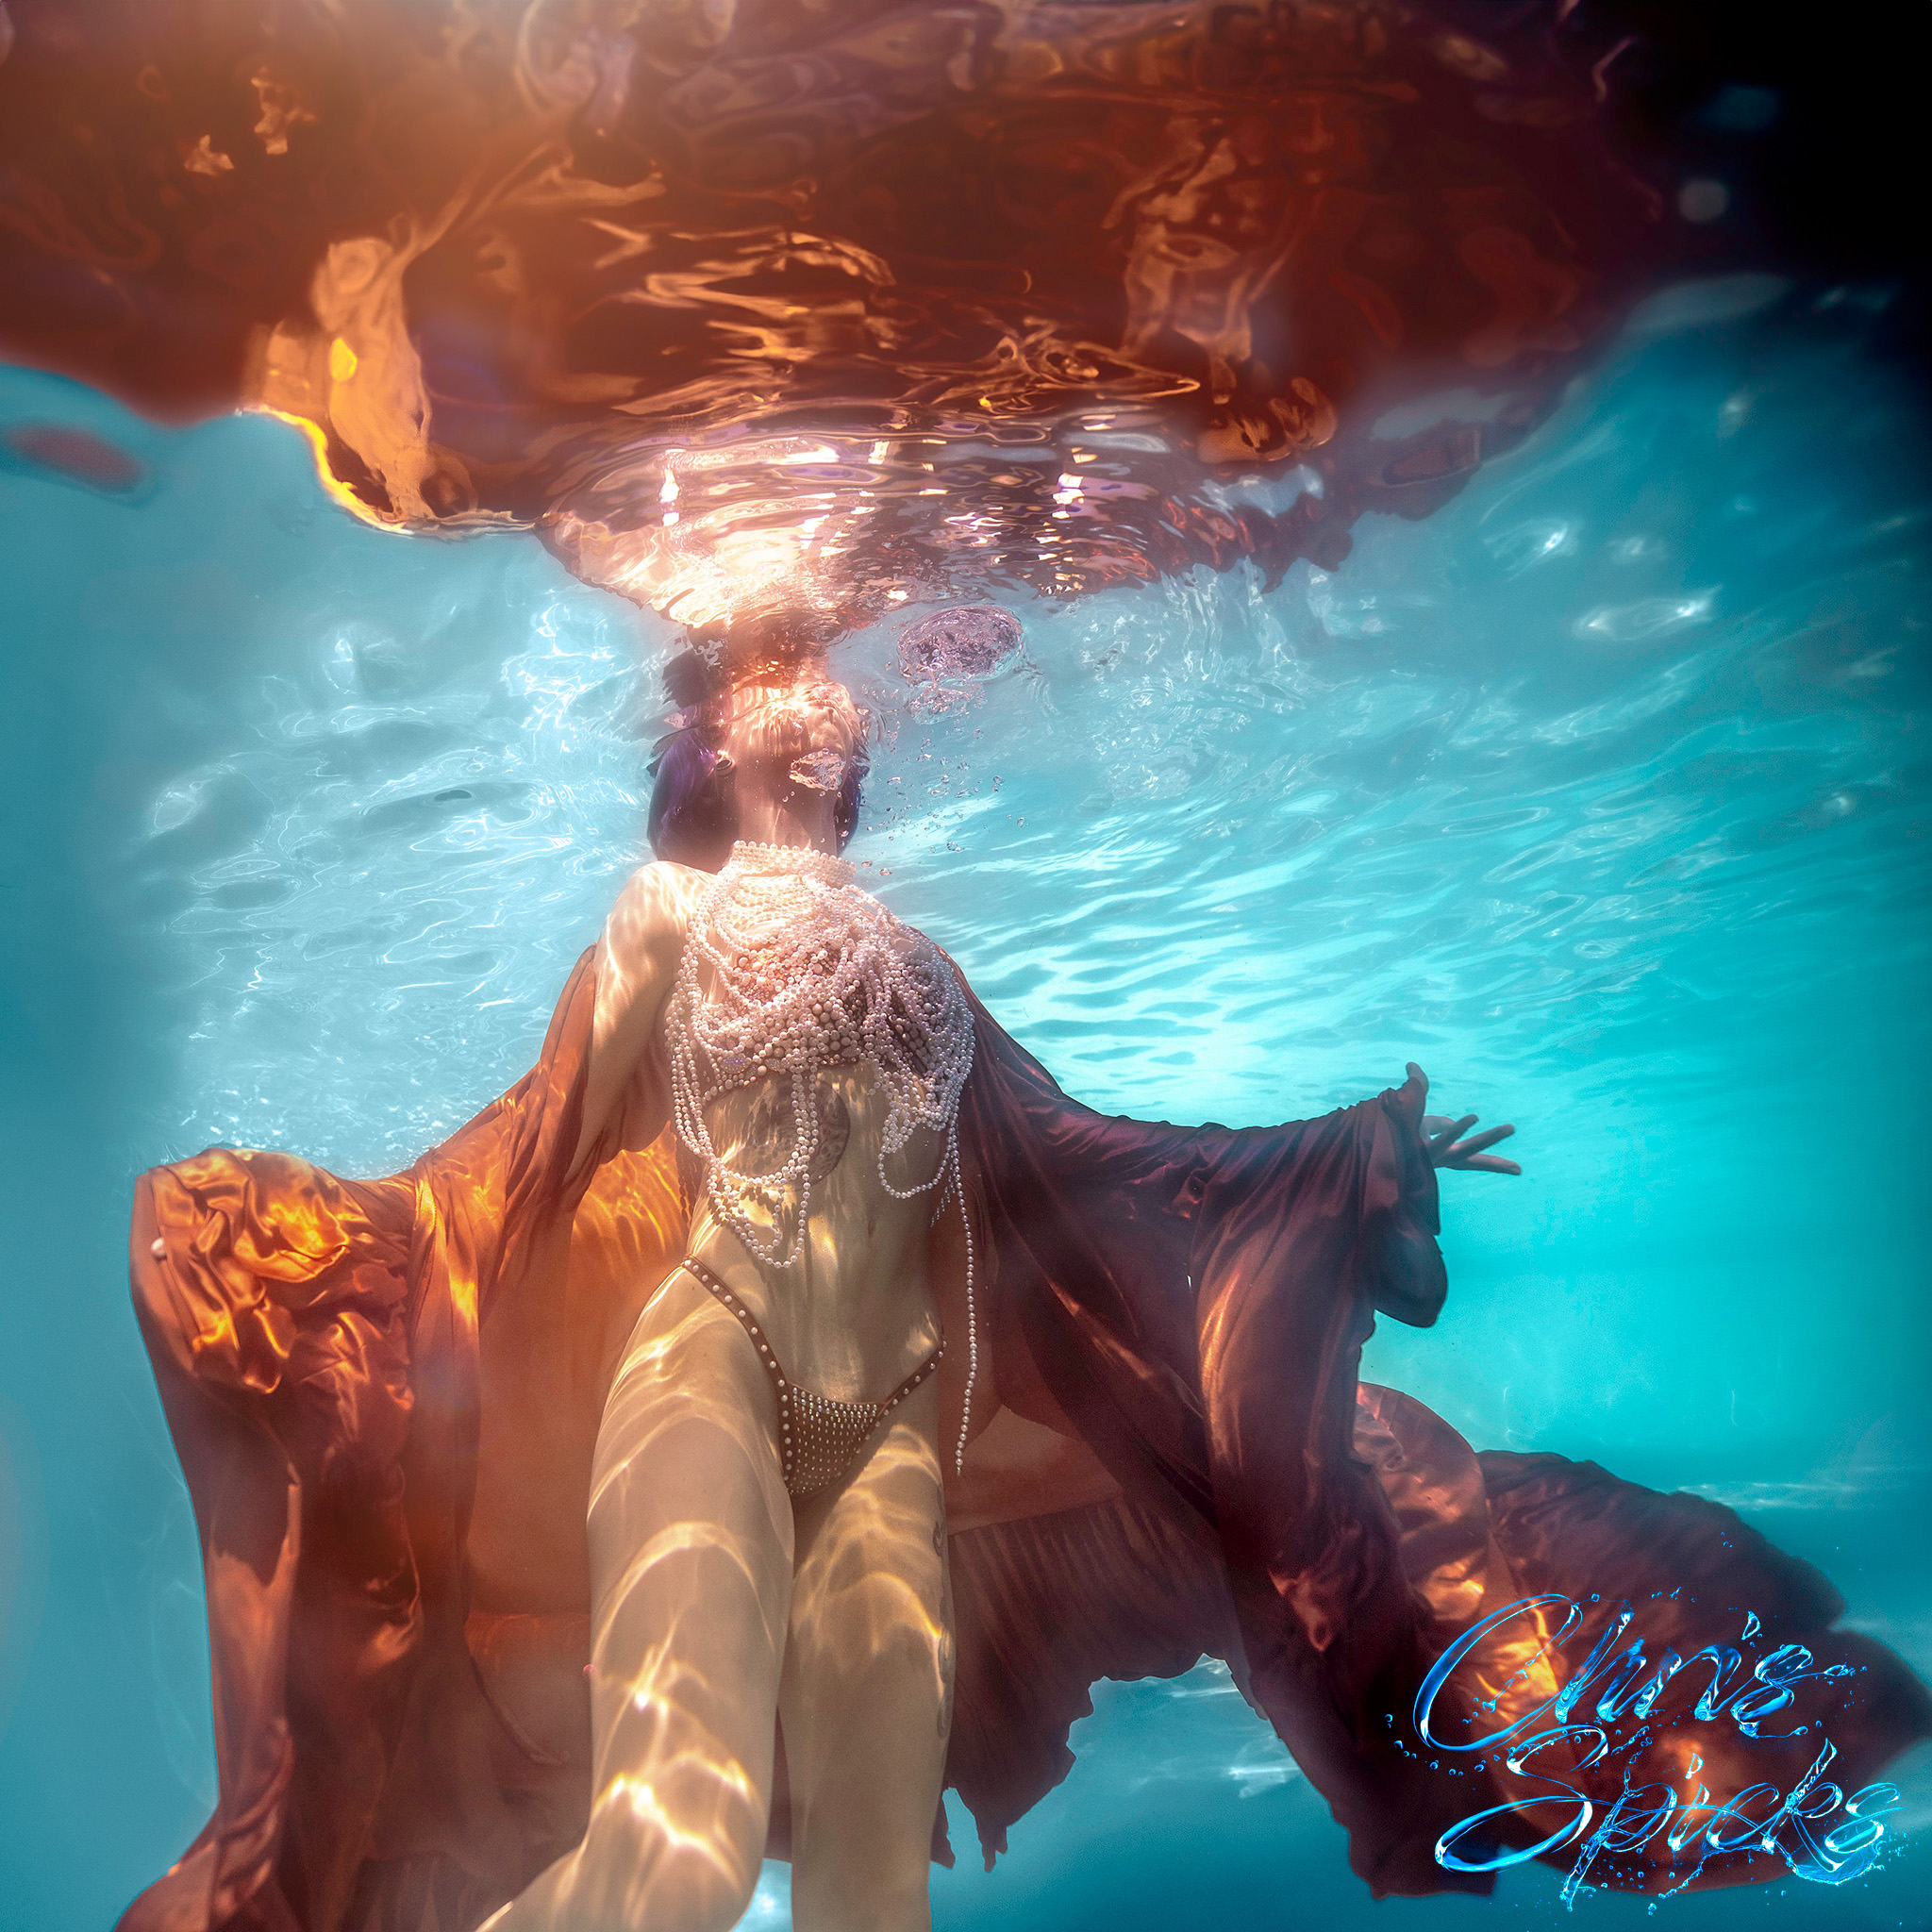 Red shoes and mirrors underwater look amazing